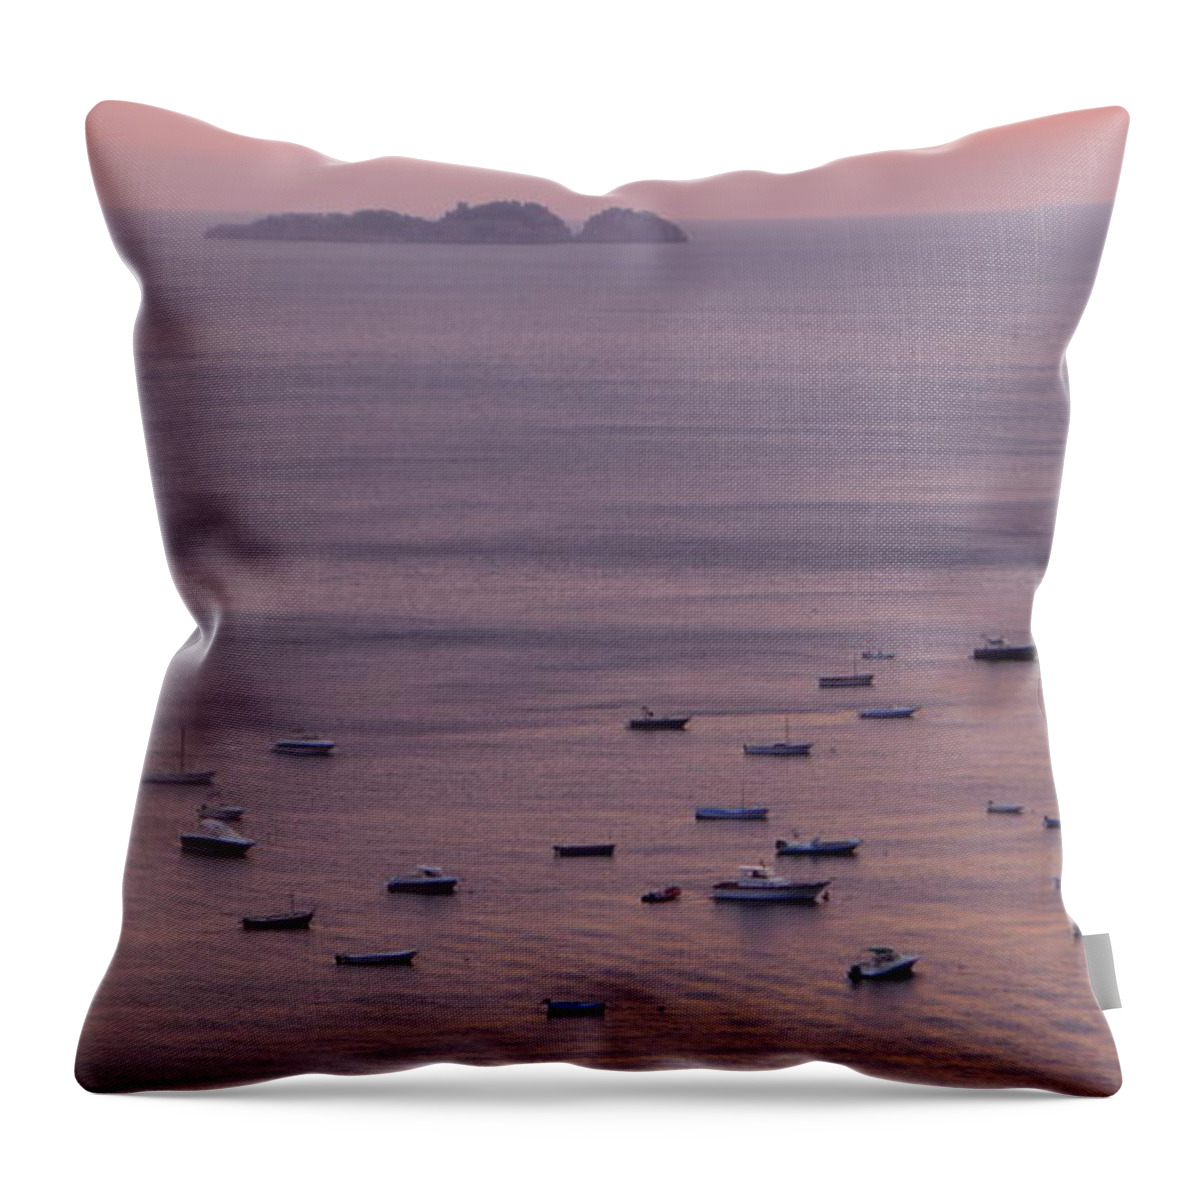  Throw Pillow featuring the photograph Siren Island - Positano by Nora Boghossian